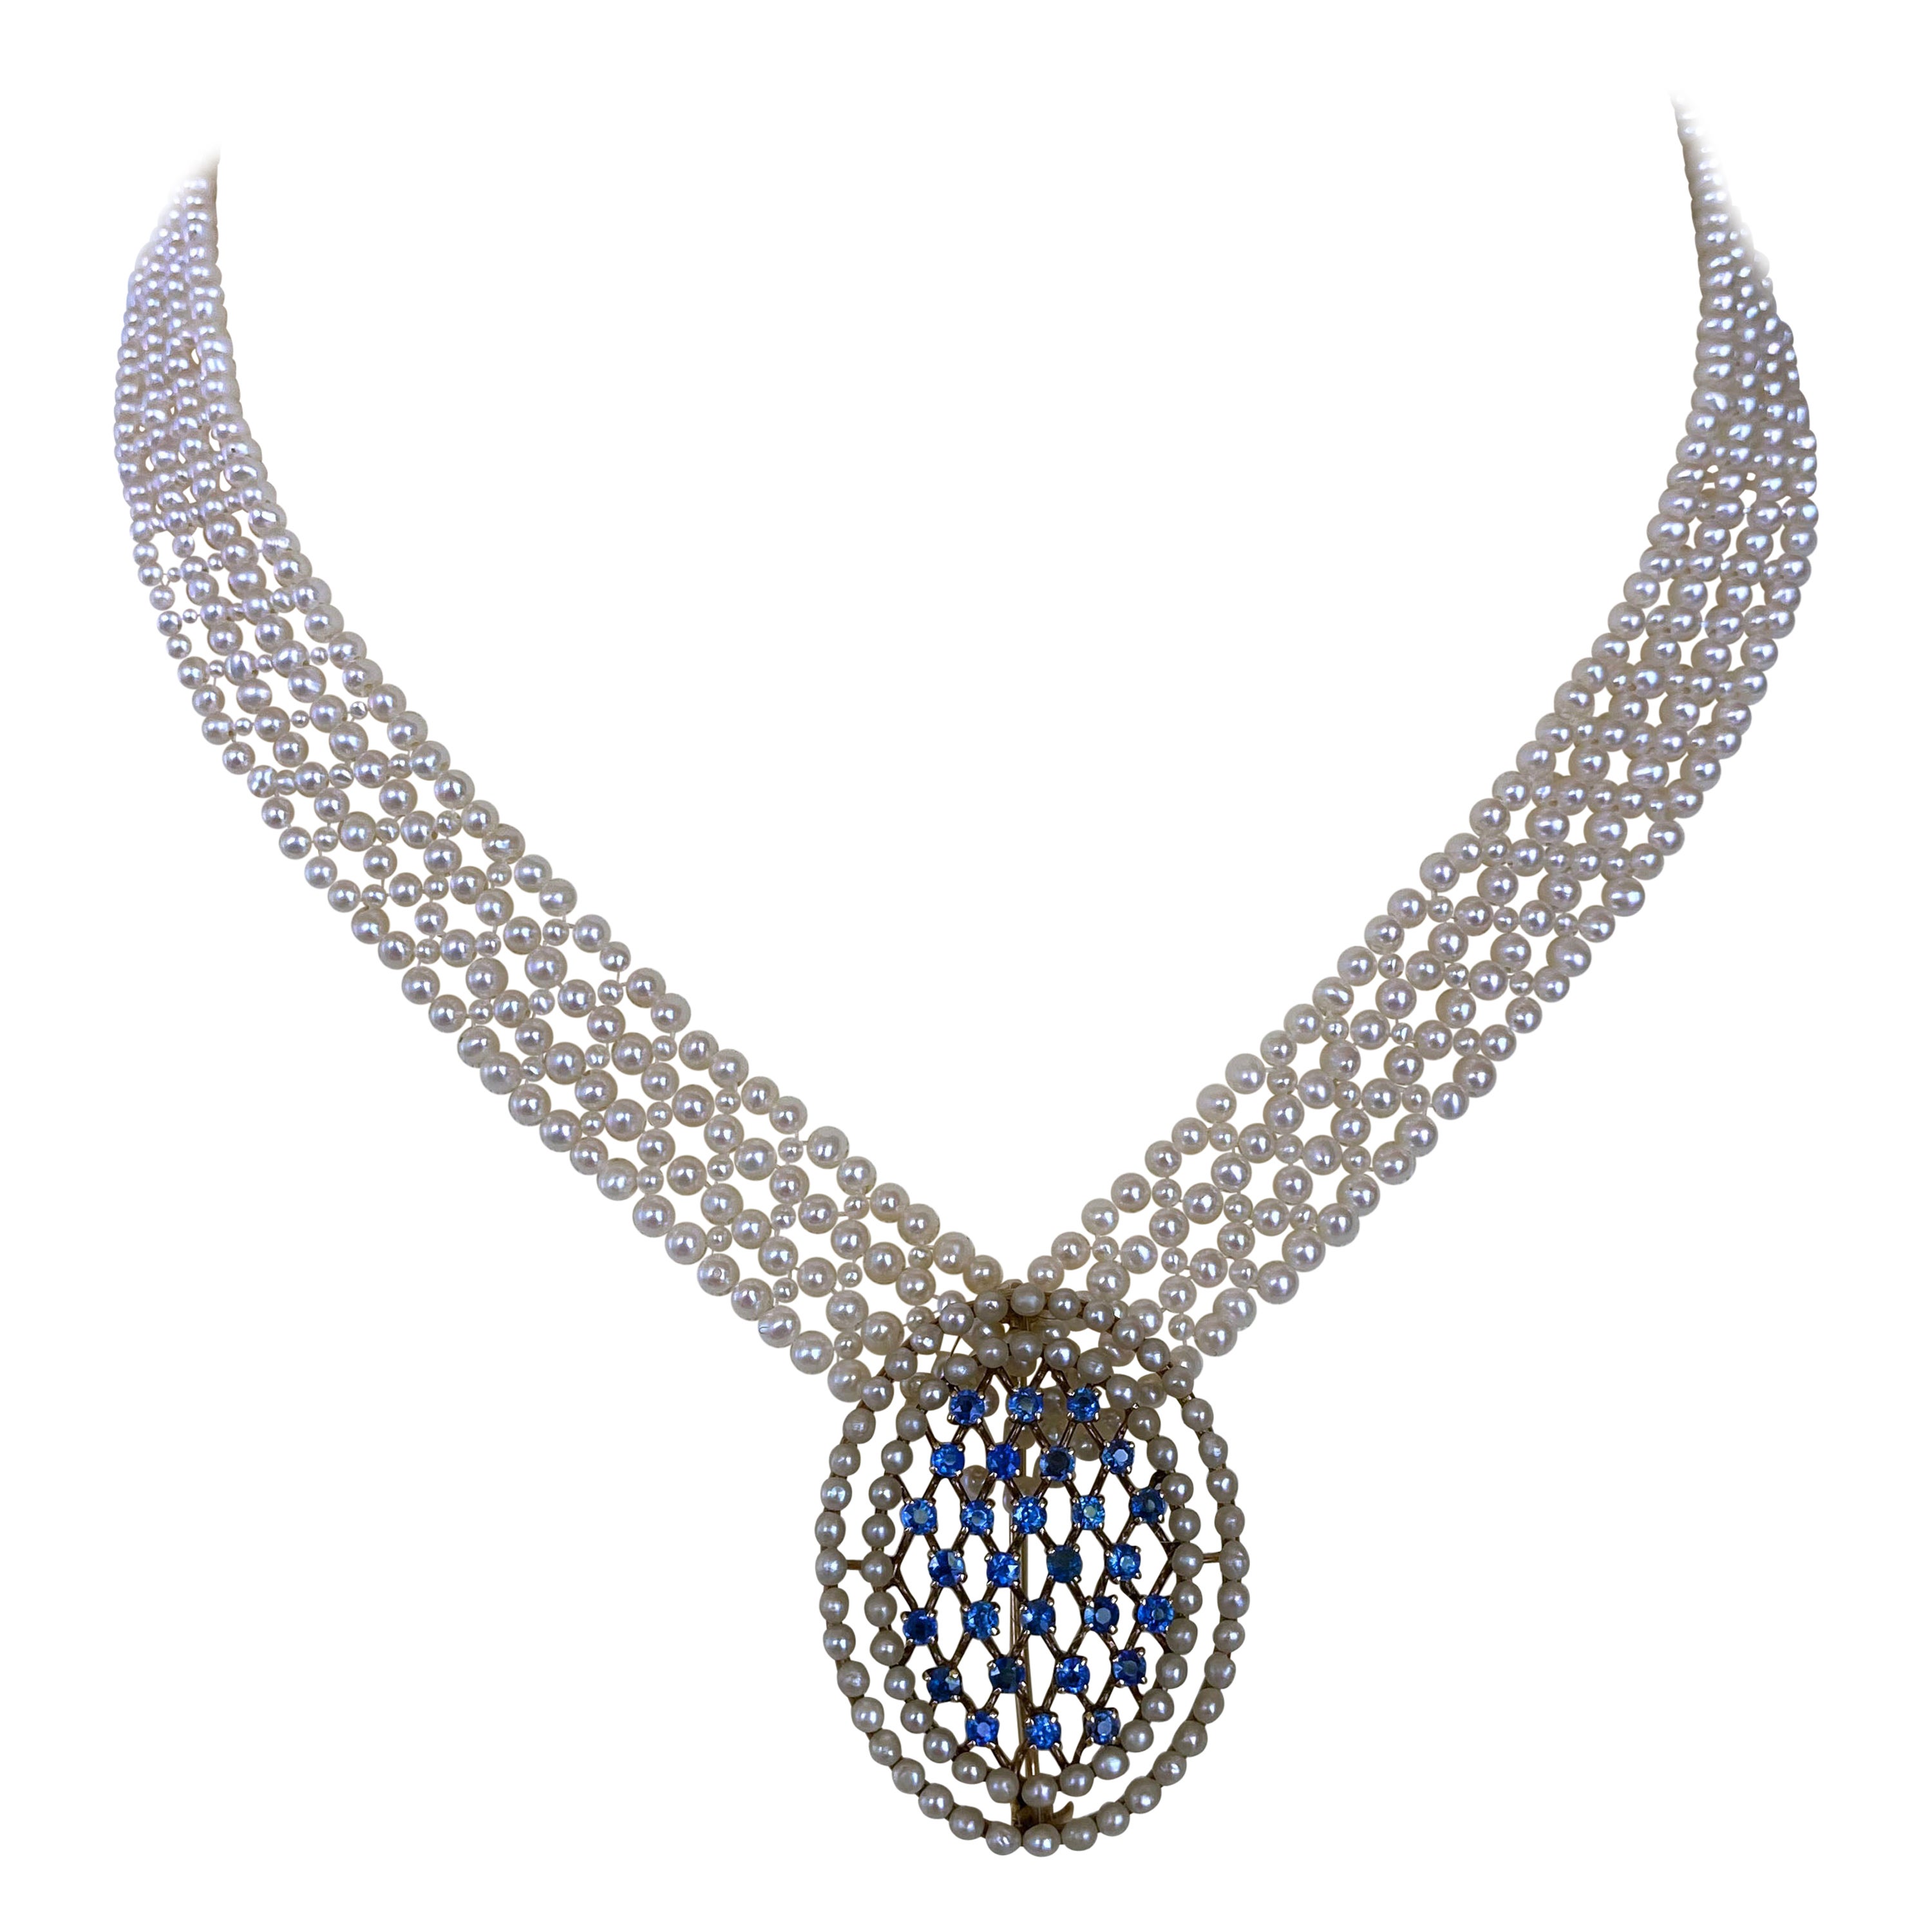 Marina J. Pearl woven Necklace with 14k Vintage Blue Sapphire & Pearl Brooch For Sale